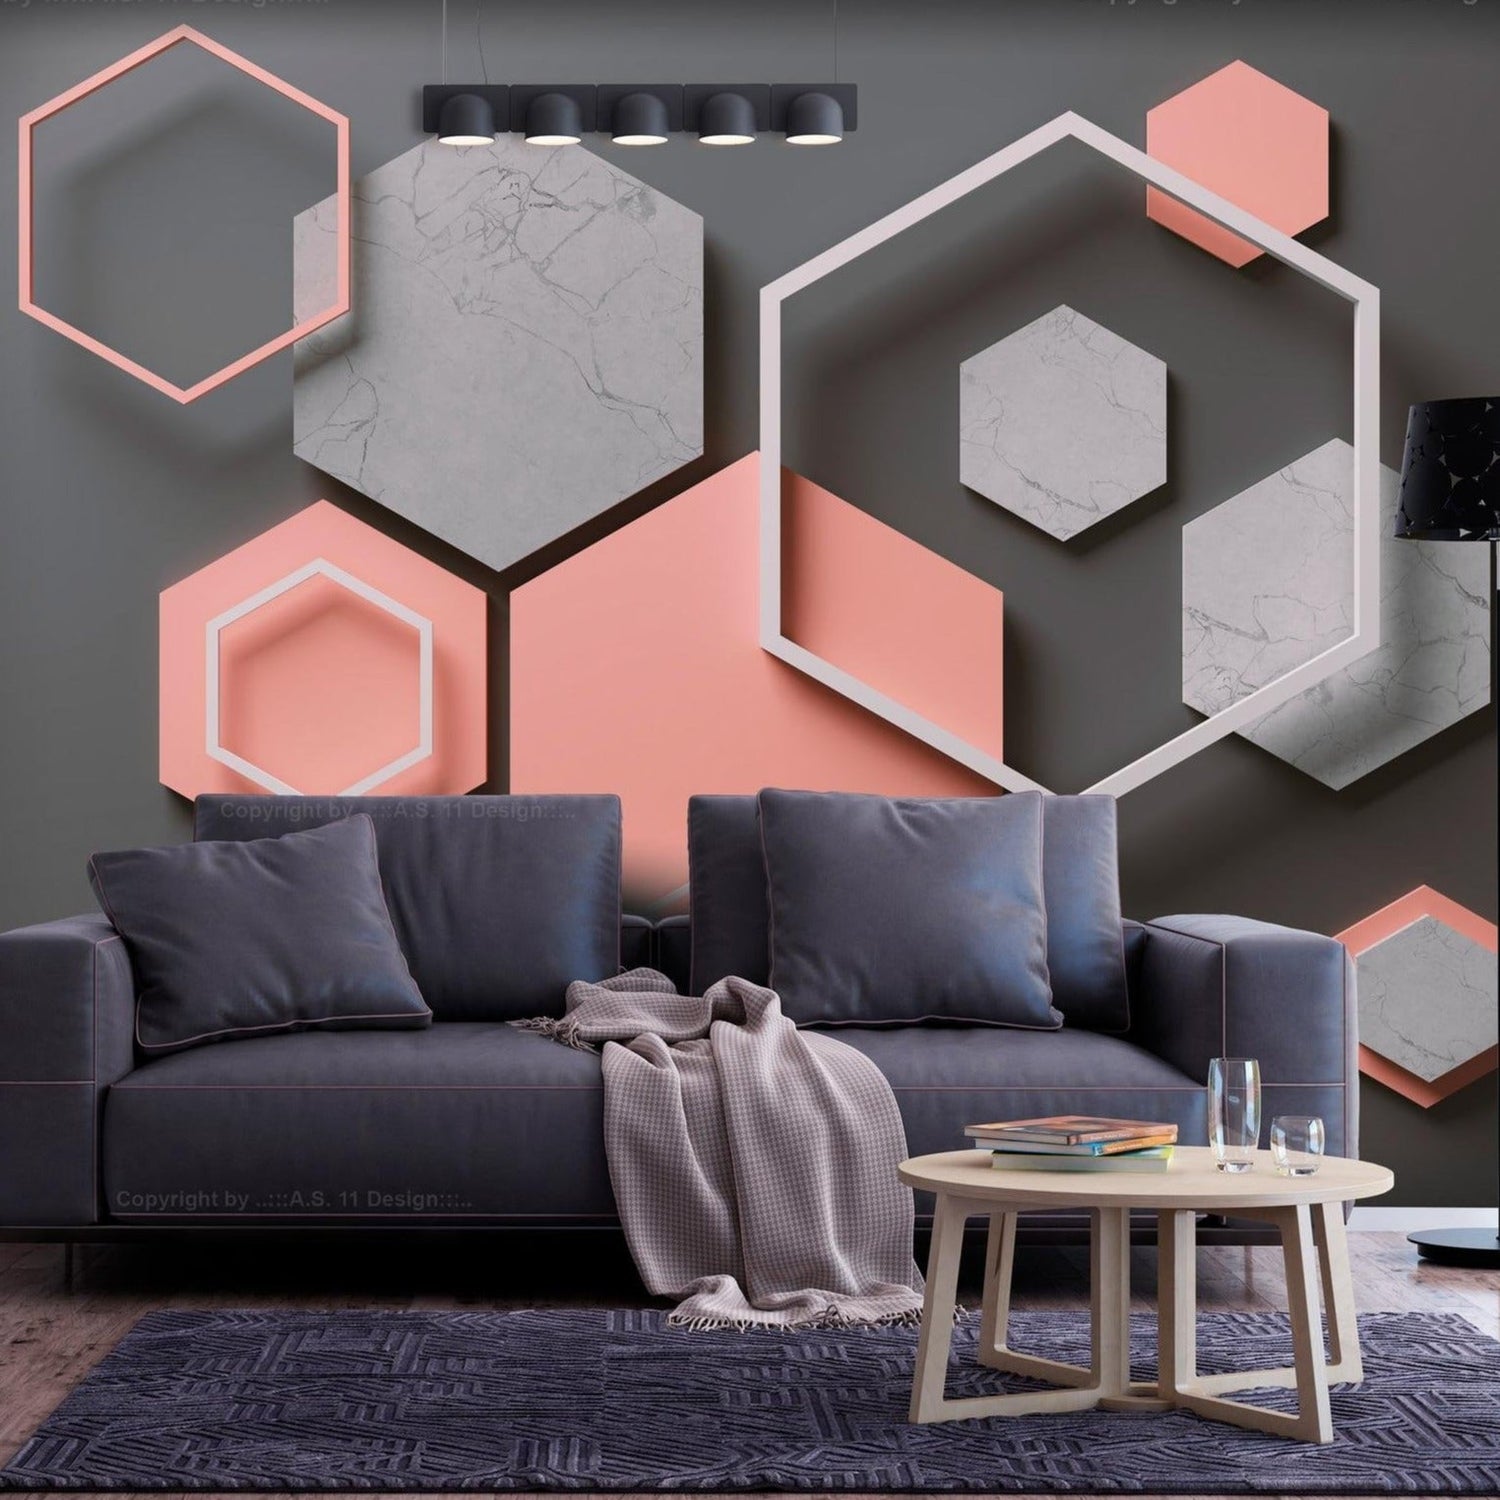 Tiptophomedecor Peel and Stick 3D Illusion Wallpaper Wall Mural - Abstract Hexagon Plan - Removable Wall Decals-Tiptophomedecor